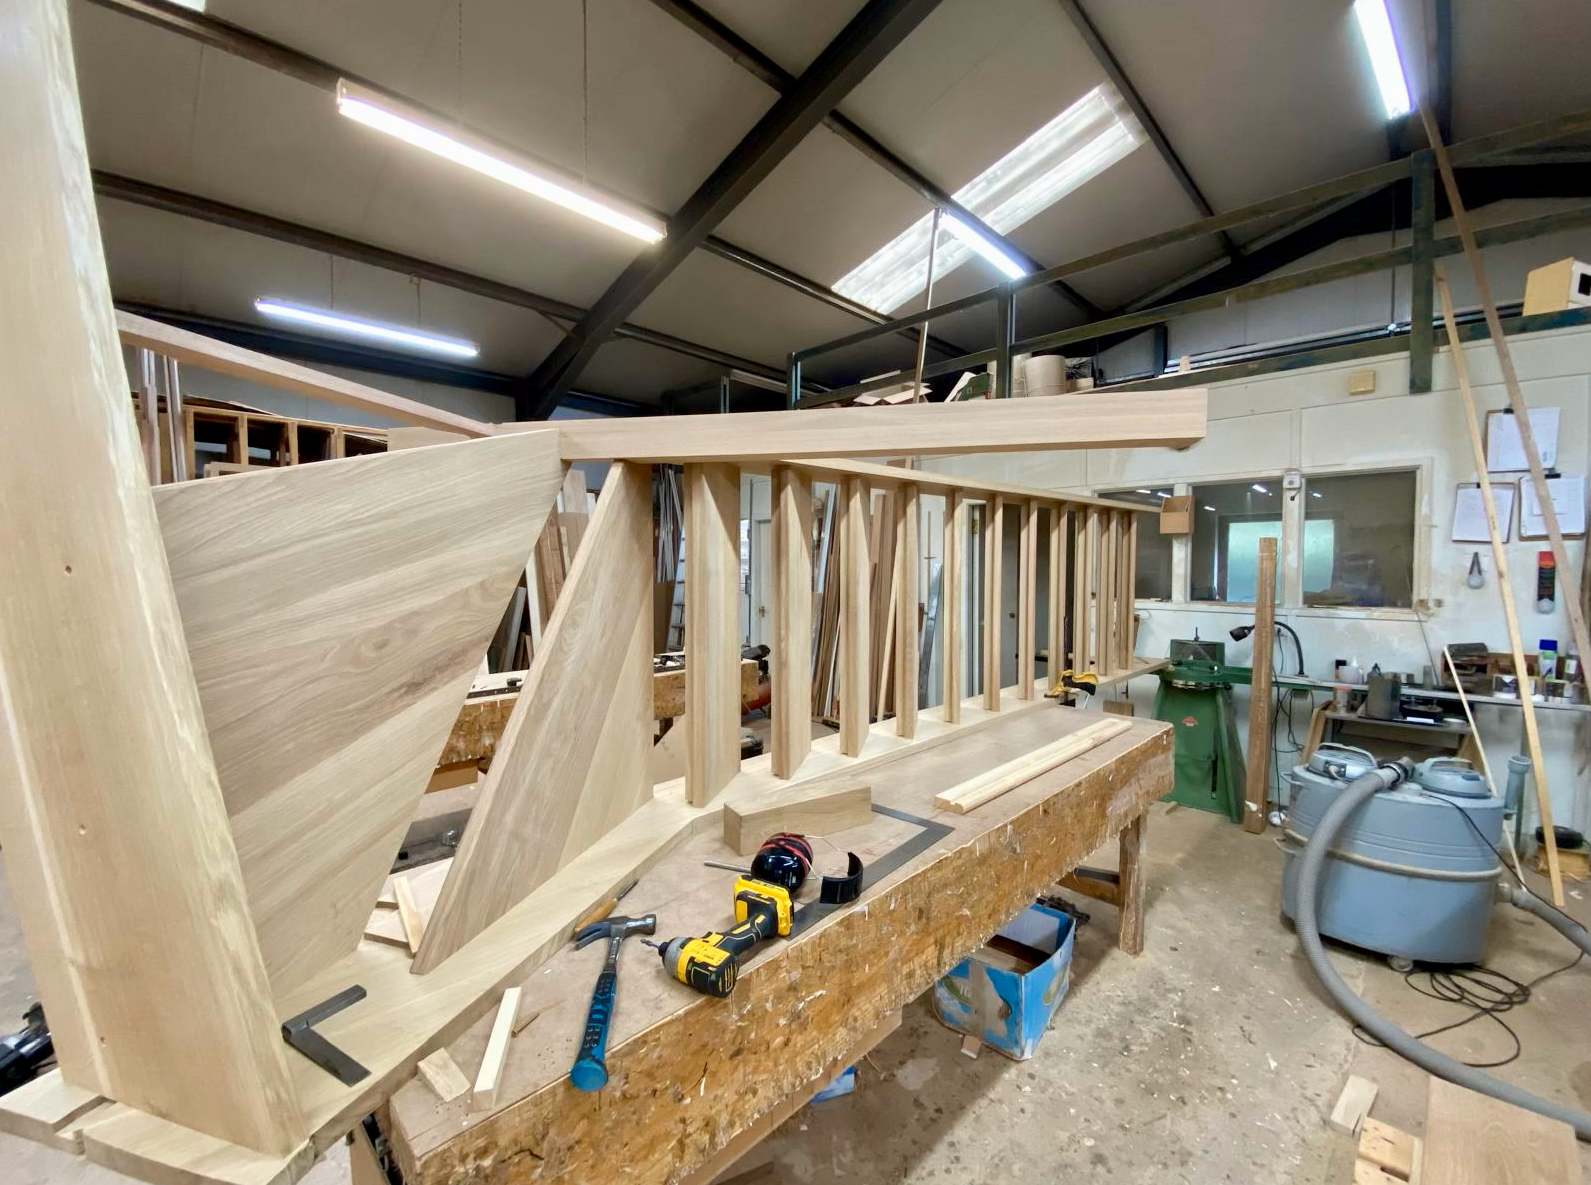 International Timber provides Laminated Oak for long-standing clients Runciman & Redpath